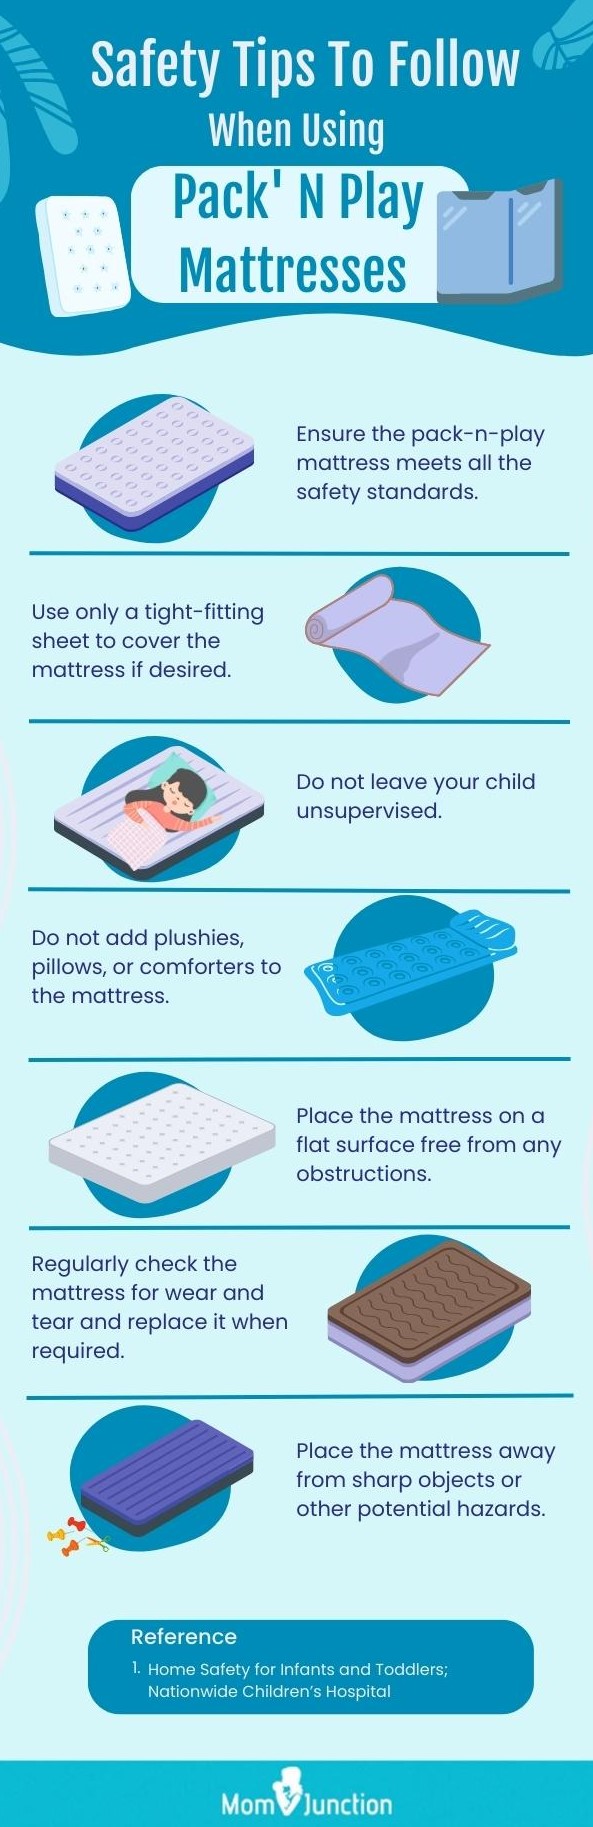 Safety Tips To Follow When Using Pack' N Play Mattresses (infographic)